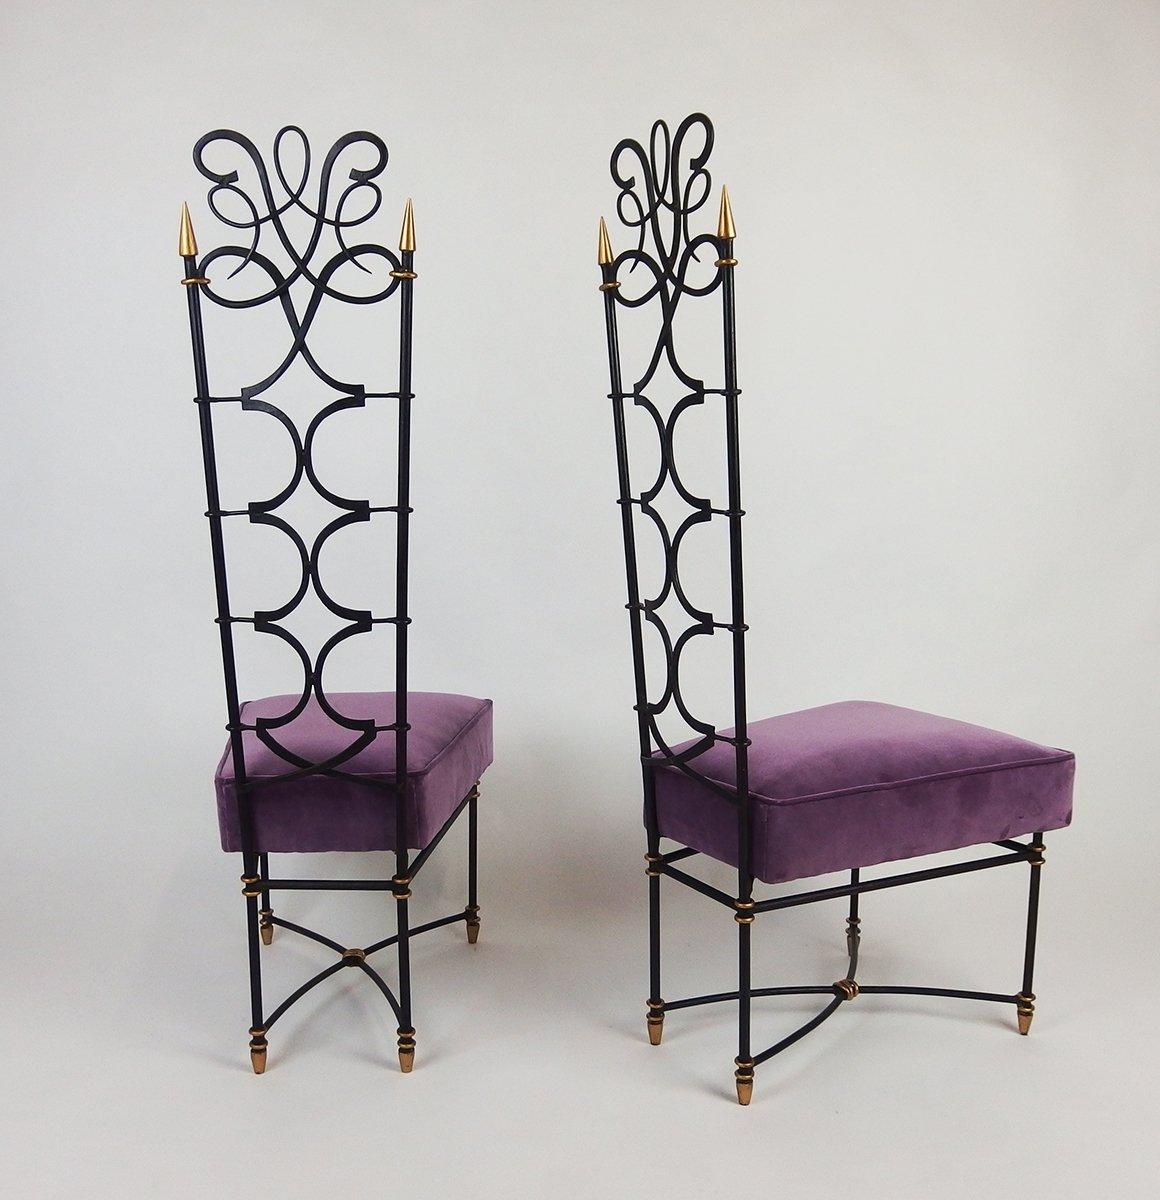 Forged Pair of Extraordinary French Art Déco Wrought Iron Side Chairs 1935s